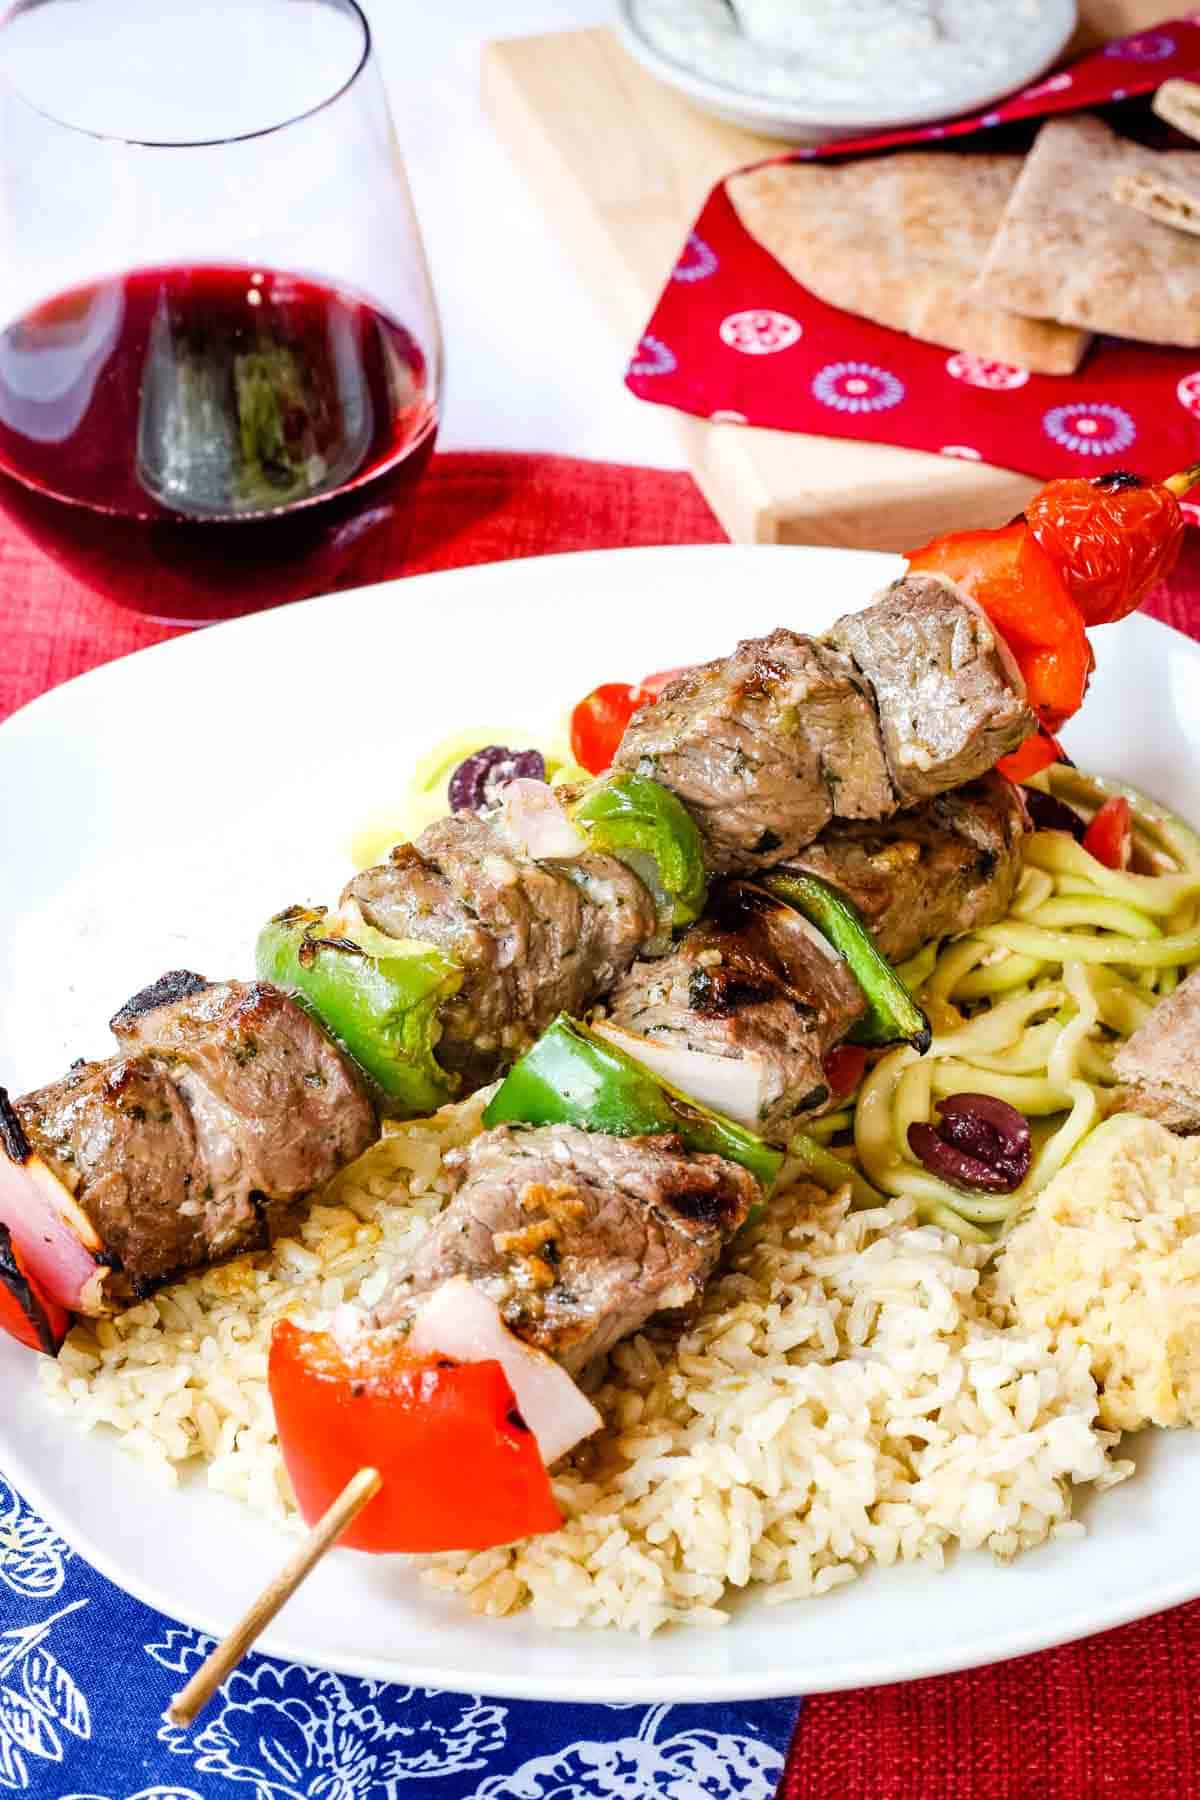 Beef Kabobs on the grill make a great Mediterranean dinner with rice and pita